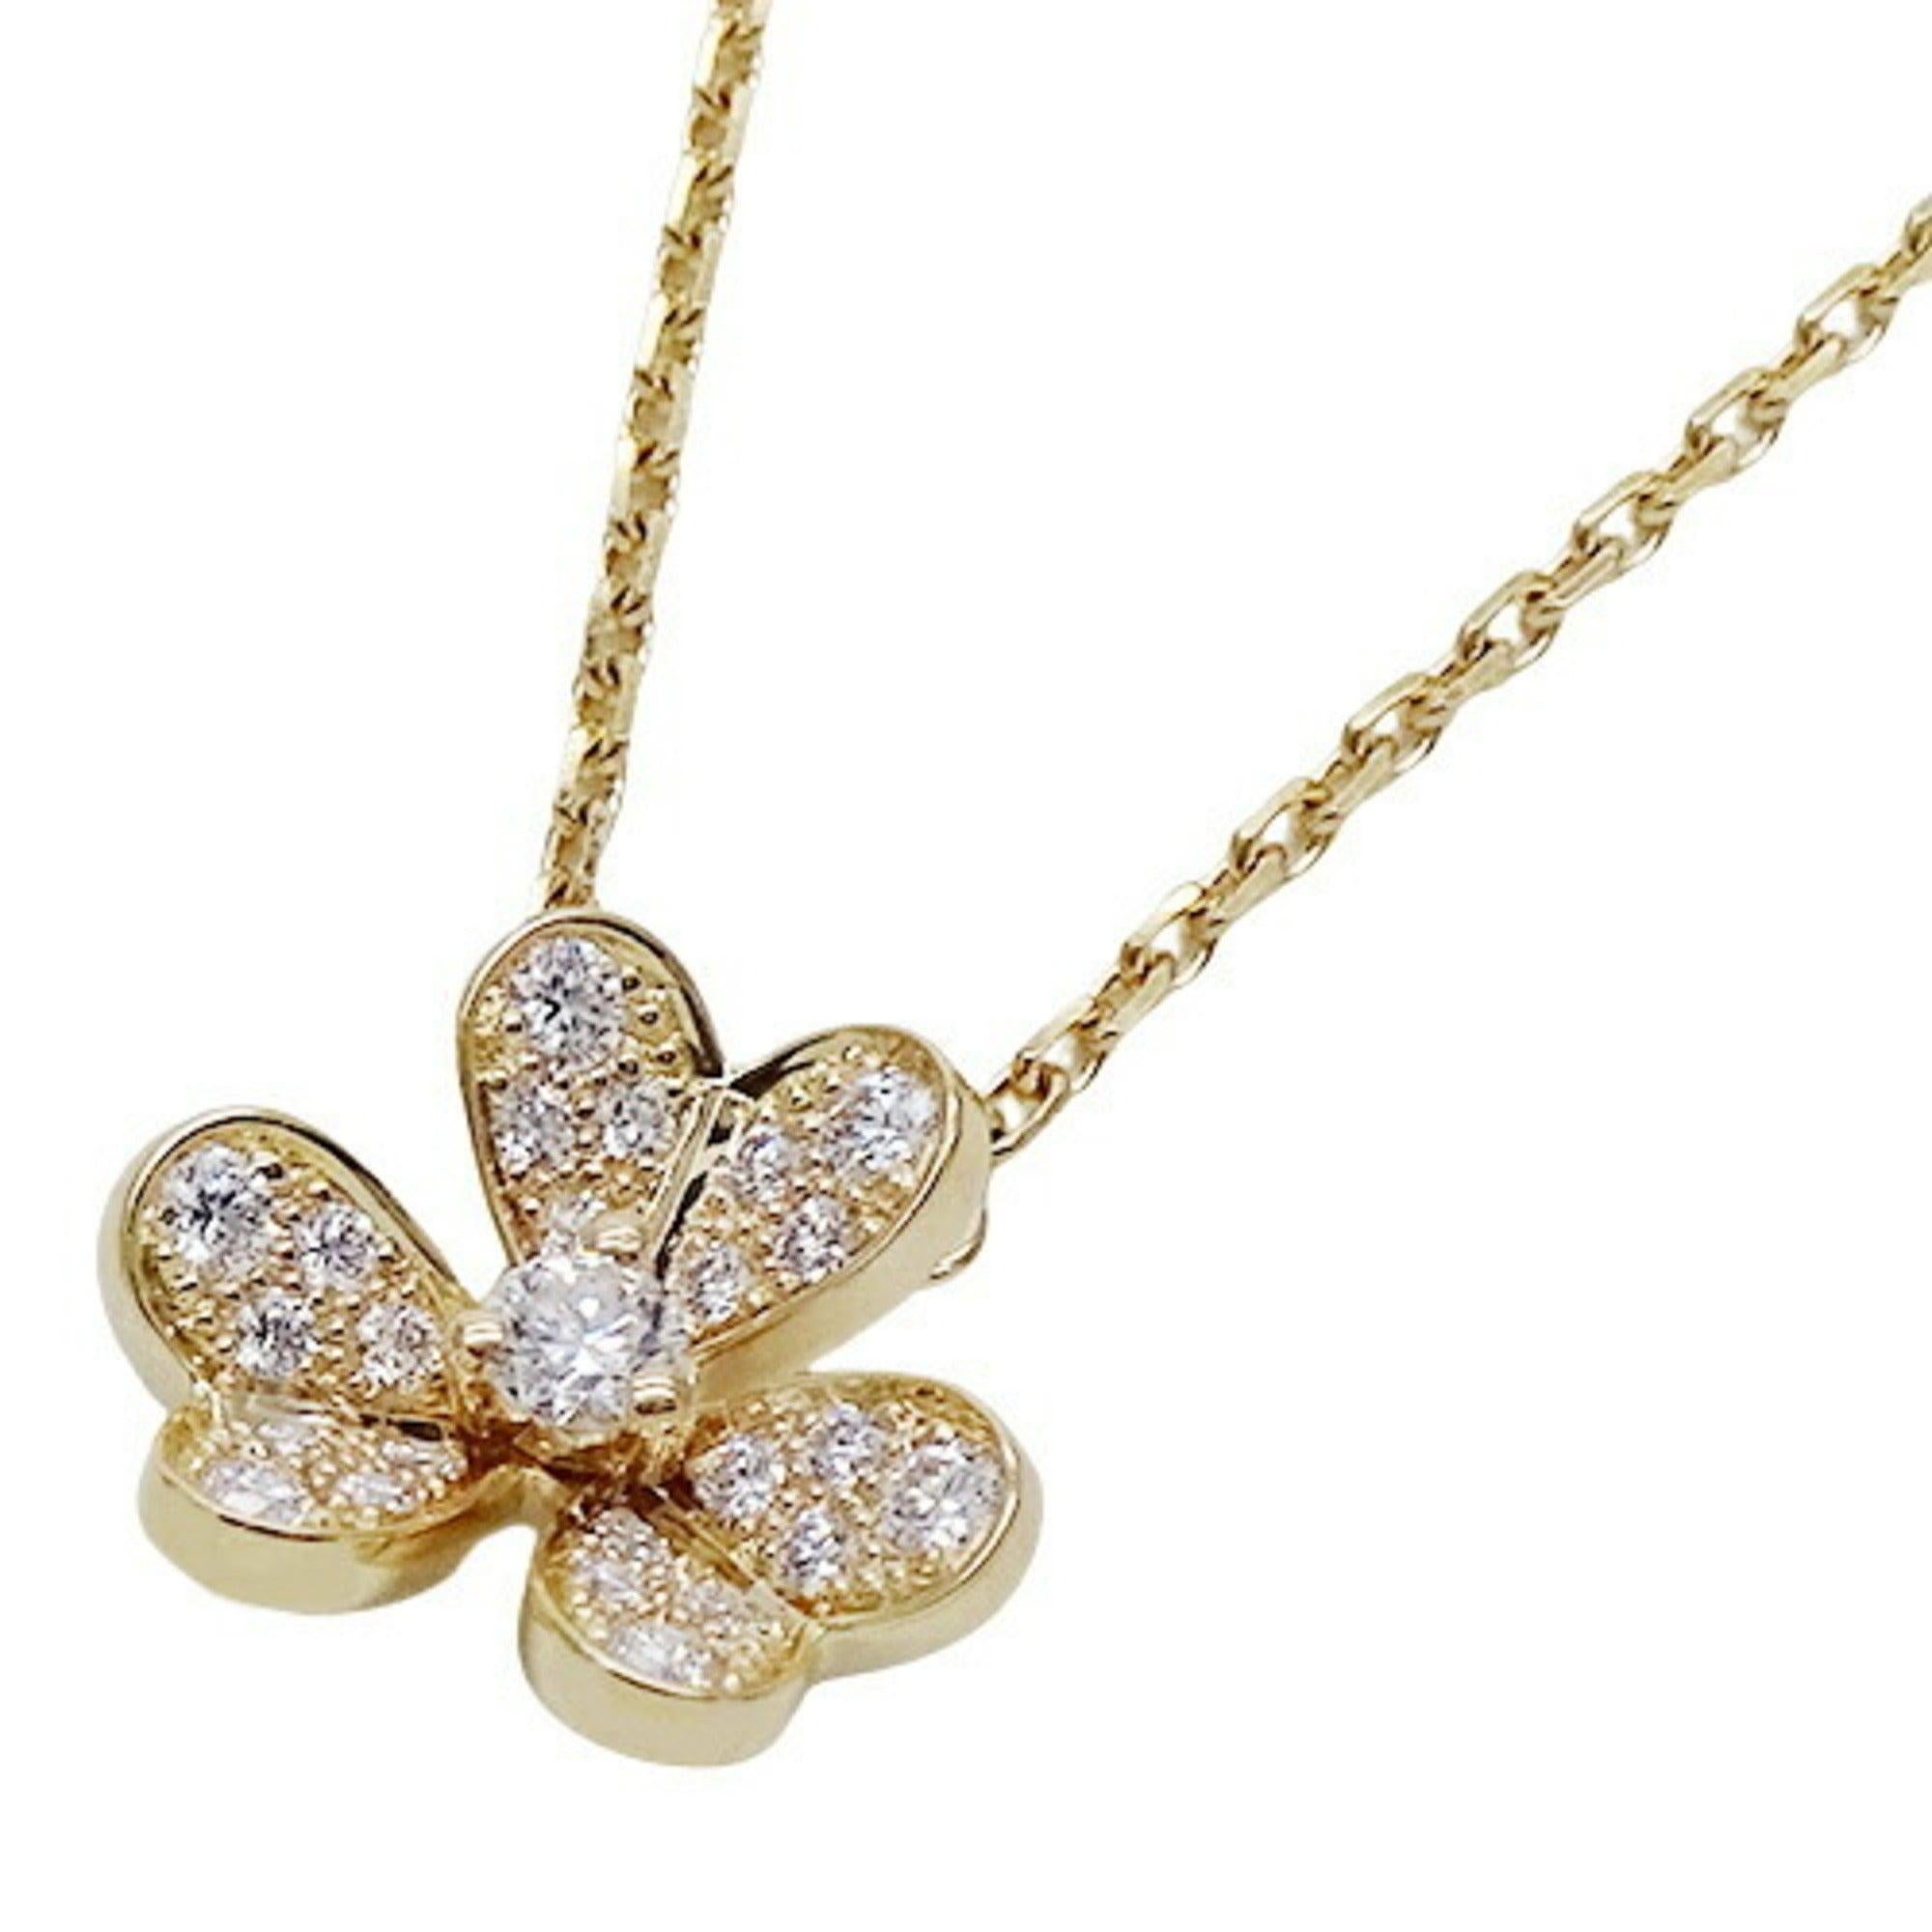 Van Cleef & Arpels Diamond Necklace in Yellow Gold

Additional information:
Brand: Van Cleef & Arpels
Gender: Women
Line: Frivole
Model: VCARP24000
Gemstone: Diamond
Condition details:This item has been used and may have some minor flaws. Before